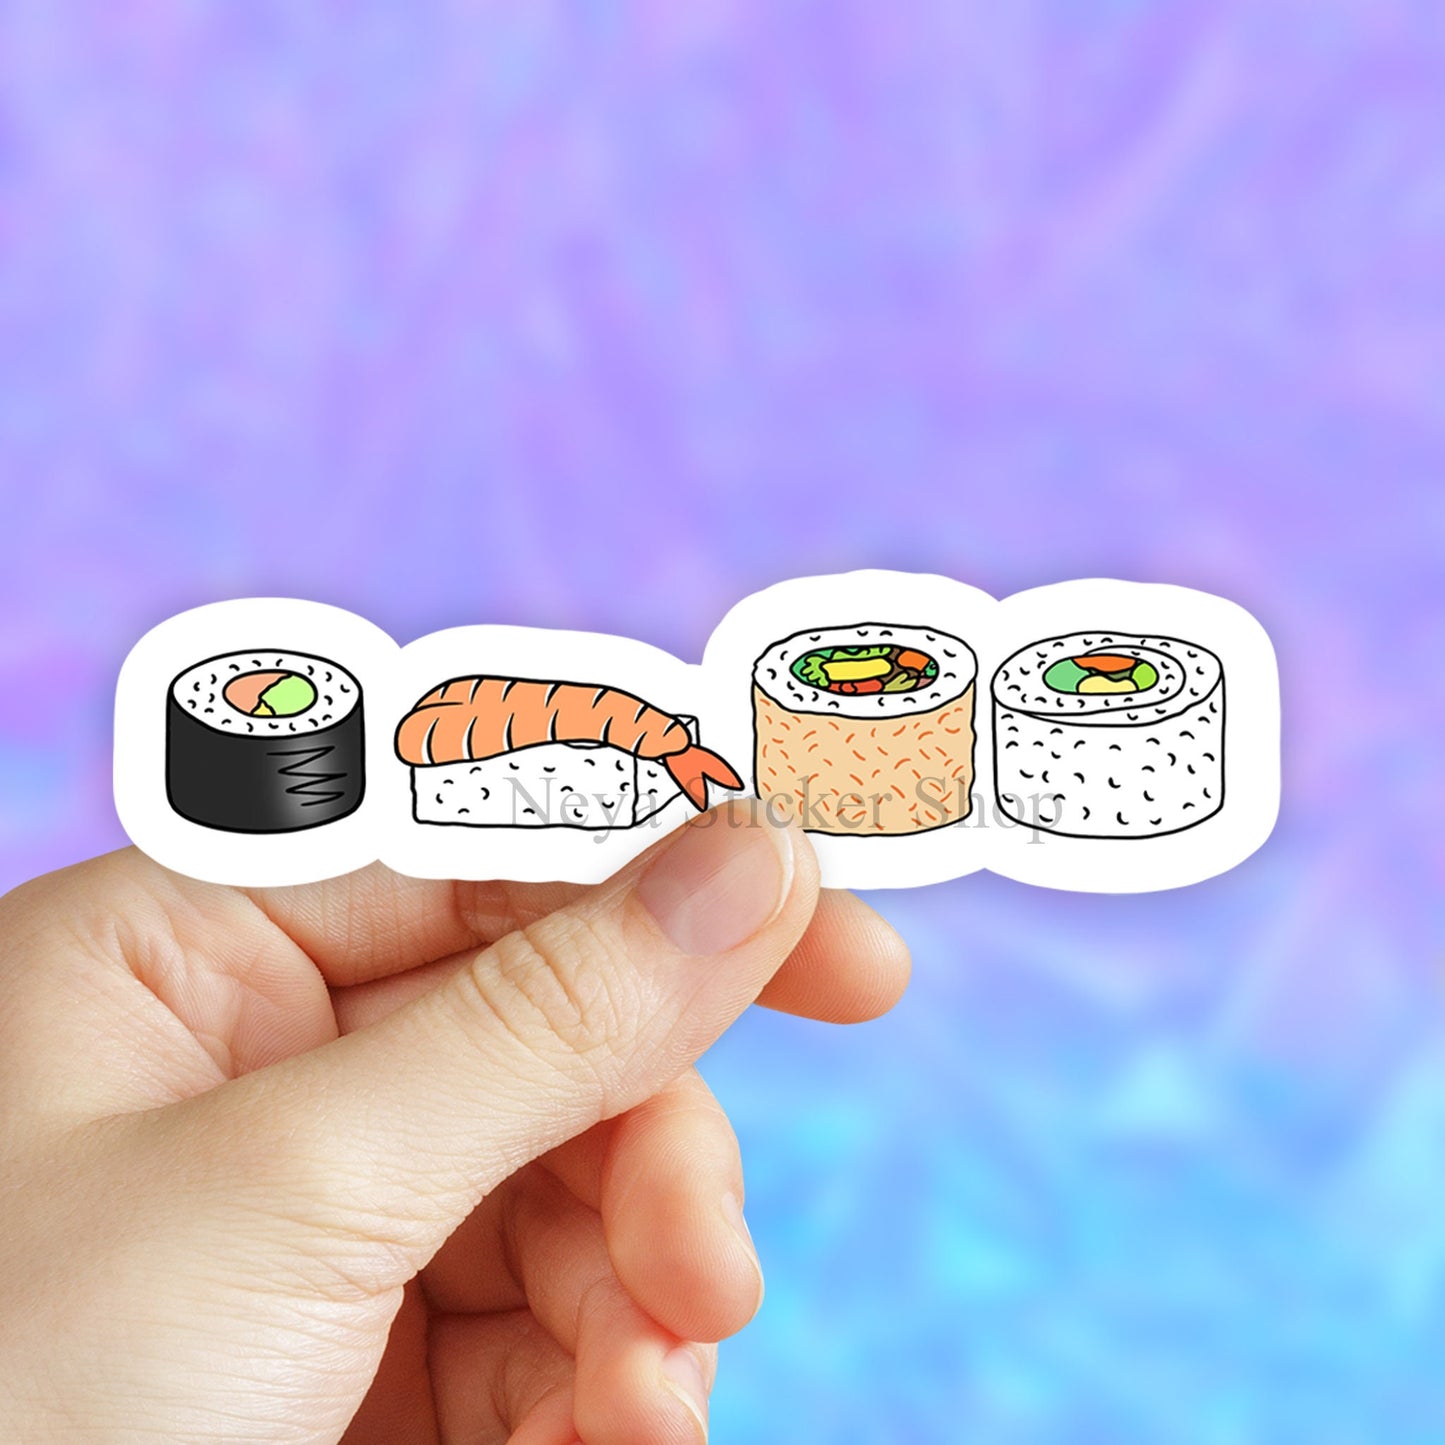 Cute Sushi Sticker, i love sushi, Food Stickers, sushi decal, Japanese Stickers, vinyl stickers, computer stickers, water bottle sticker